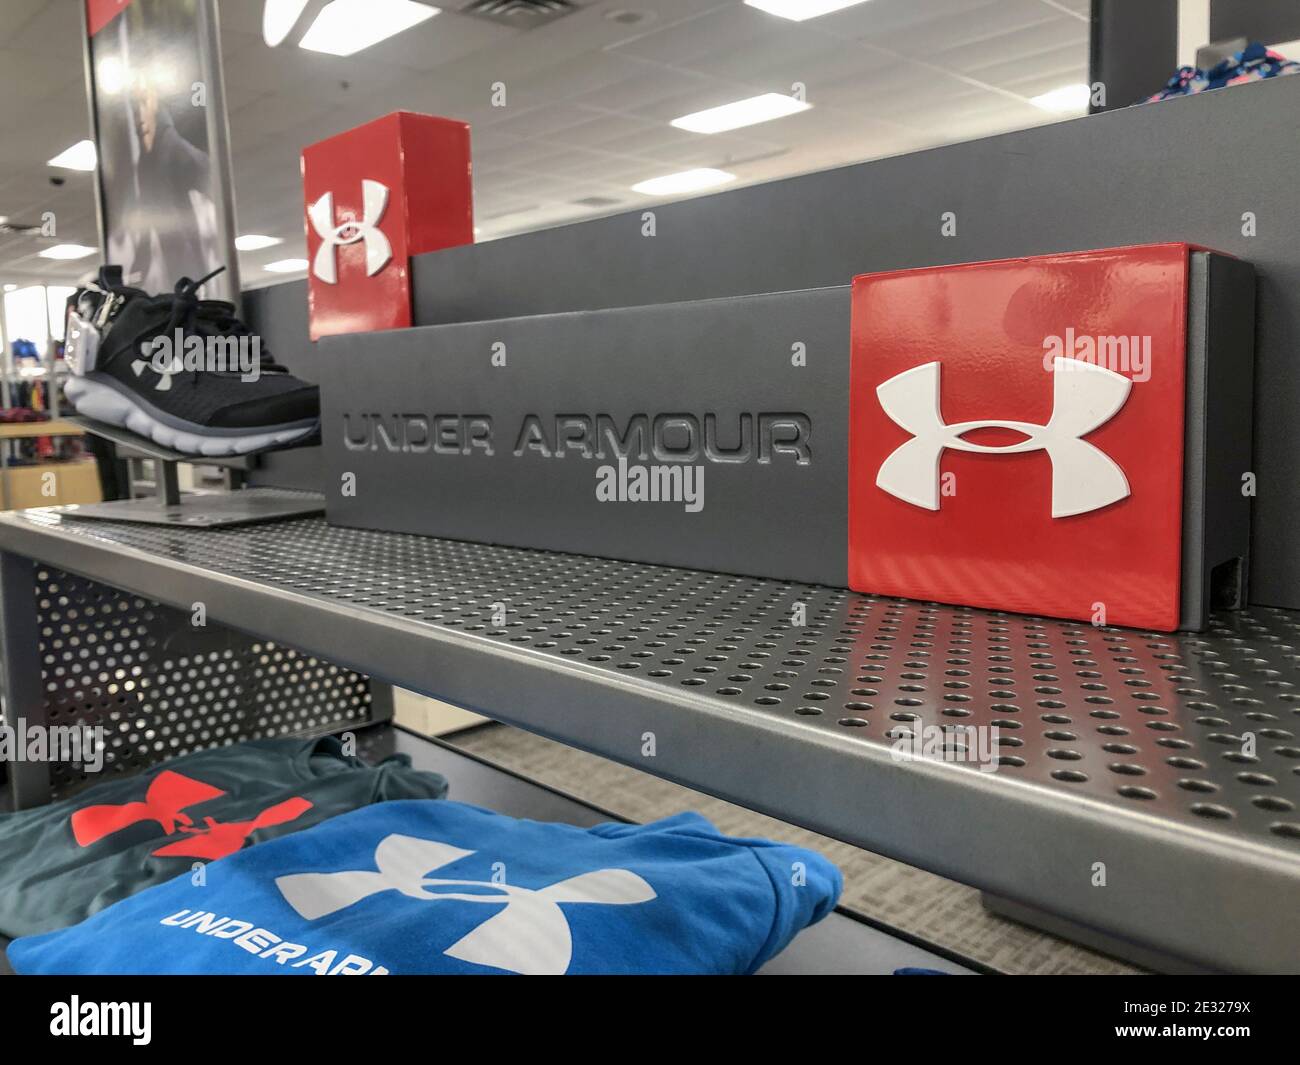 Indianapolis - Circa January 2021: Under Armour display. Under Armour manufactures a popular line of sporting equipment apparel. Stock Photo